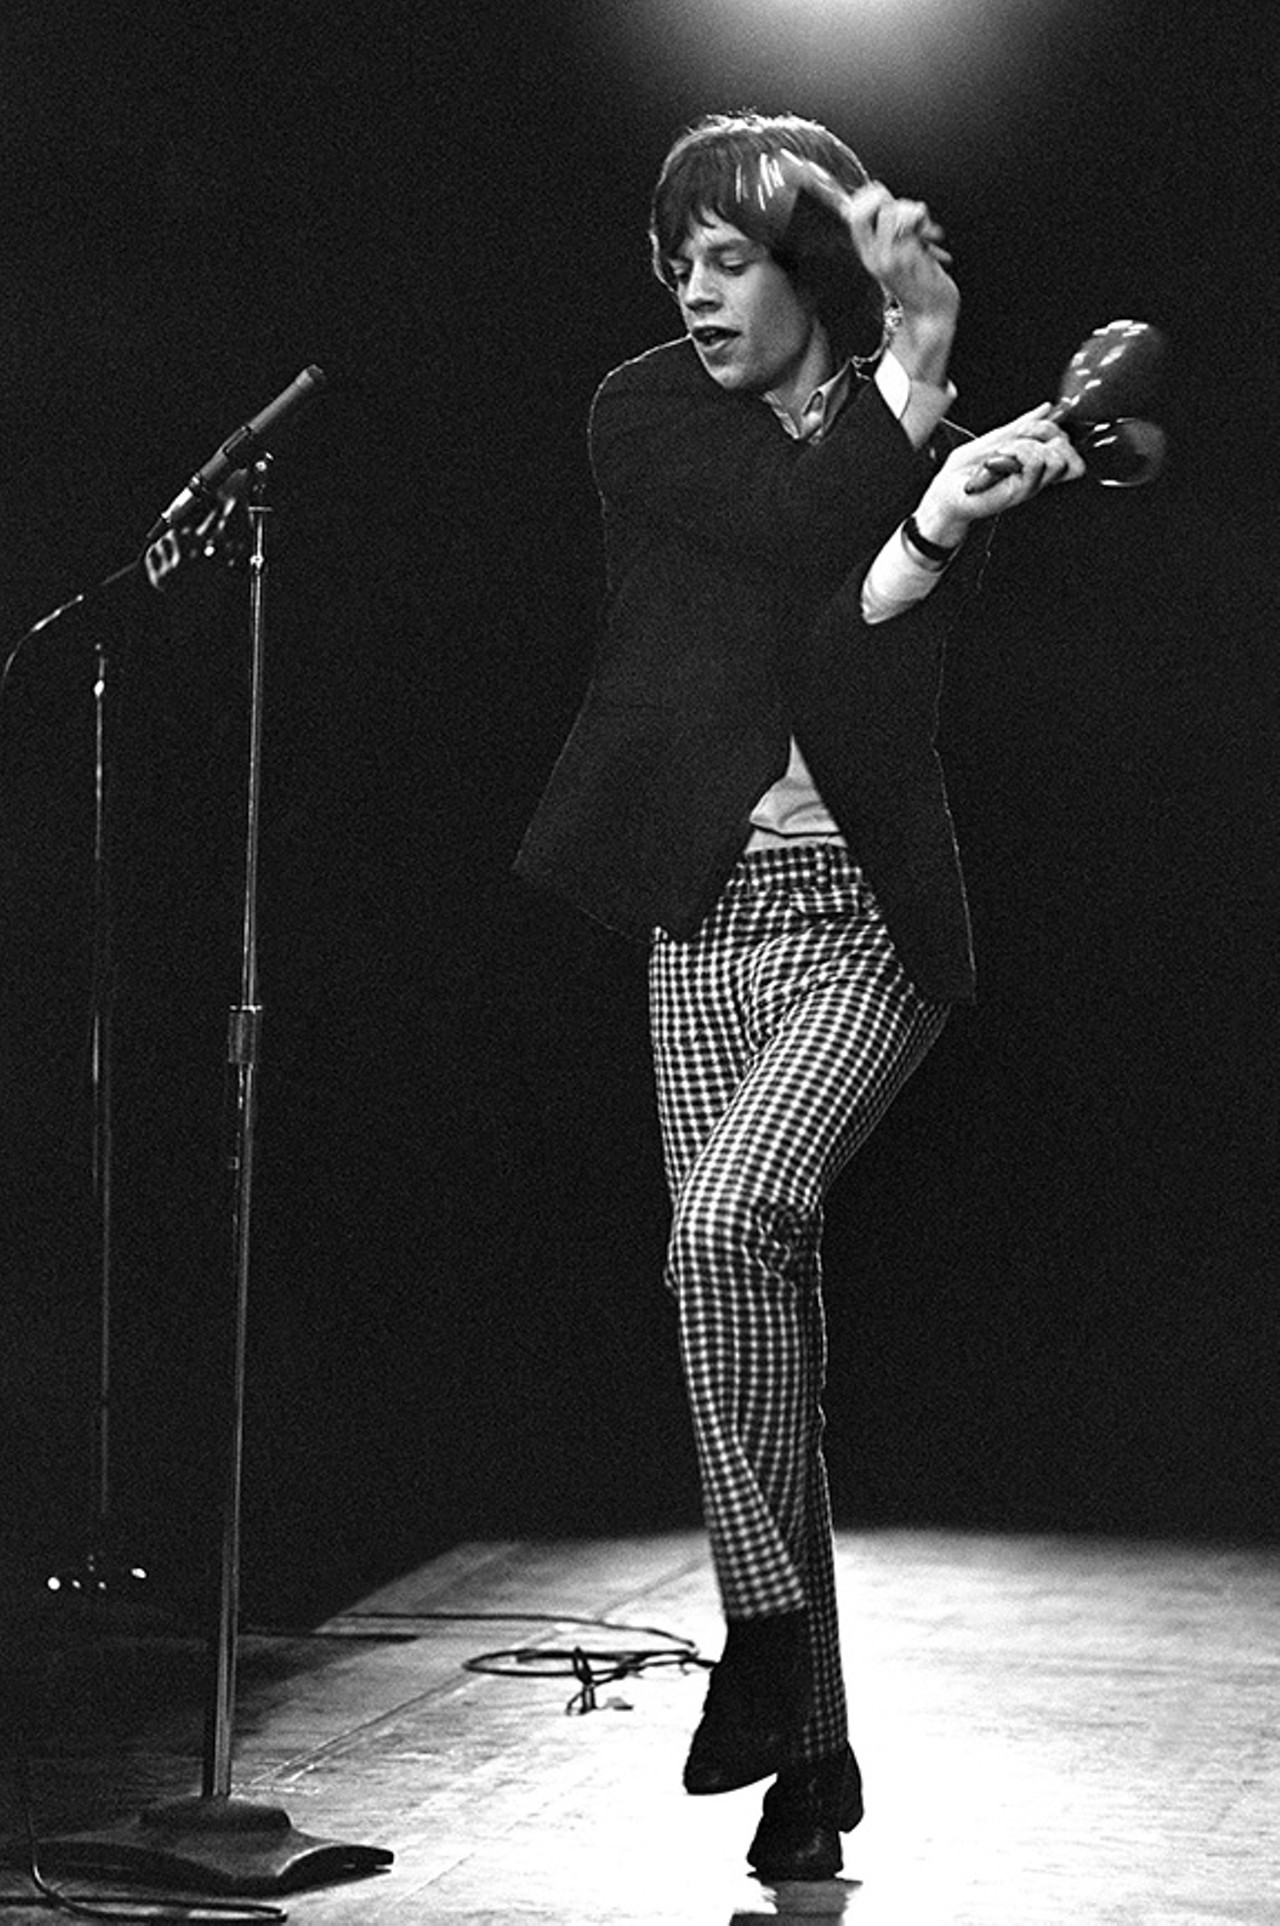 Mick Jagger With Maracas, Fourth U.S. Tour, 1965 #1
Mick Jagger, wearing some hypnotizing pants, was captured at the perfect moment in this photo by Bob Bonis in mid-step on stage, shaking his maracas during a performance of the Stones&#146; first U.S. single, &#147;Not Fade Away,&#148; originally recorded by Buddy Holly and the Crickets.